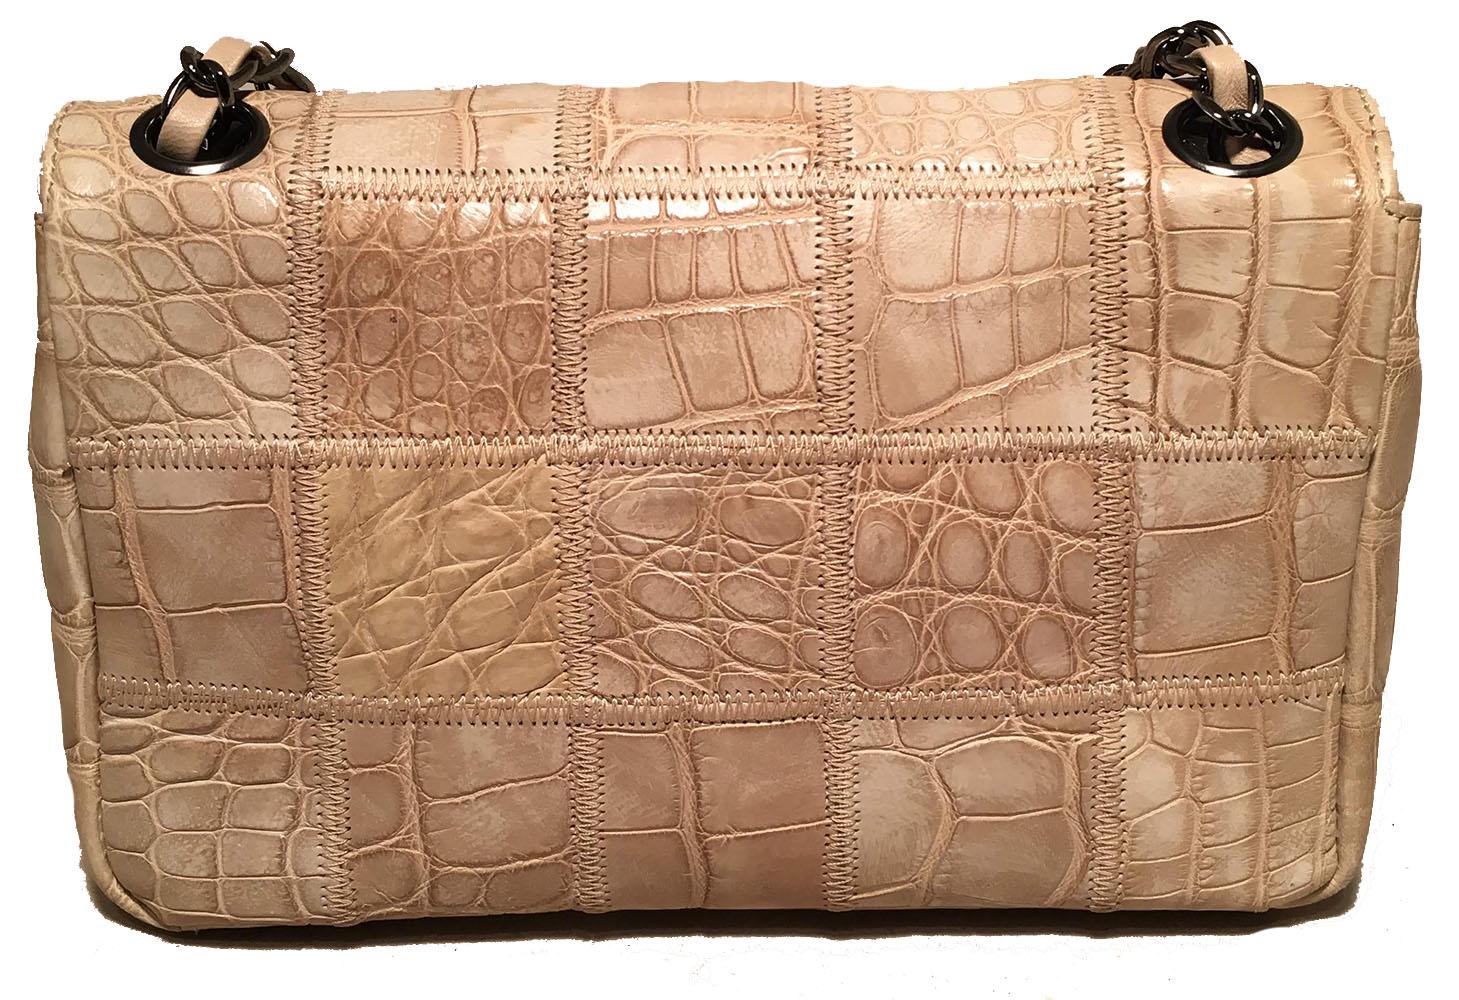 RARE Chanel Natural Beige Crocodile Quilted Classic Flap Shoulder Bag in excellent condition. Natural beige tan crocodile leather exterior trimmed with beige leather and gunmetal hardware. Single flap snap closure opens to a beige leather lined